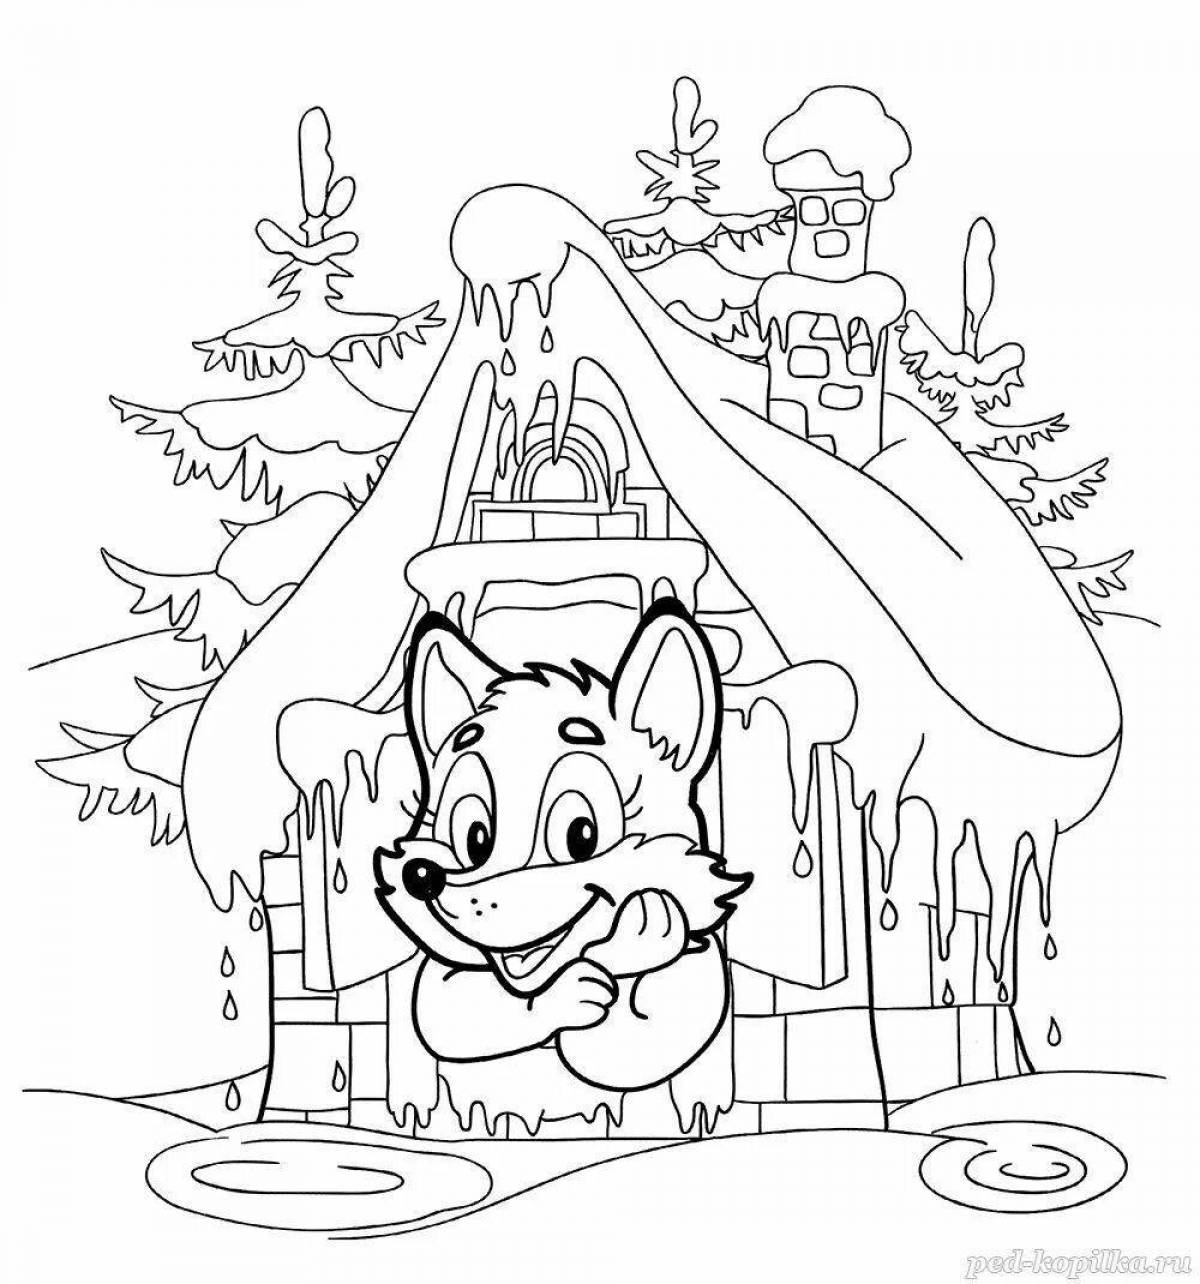 Incredible coloring book visiting a fairy tale